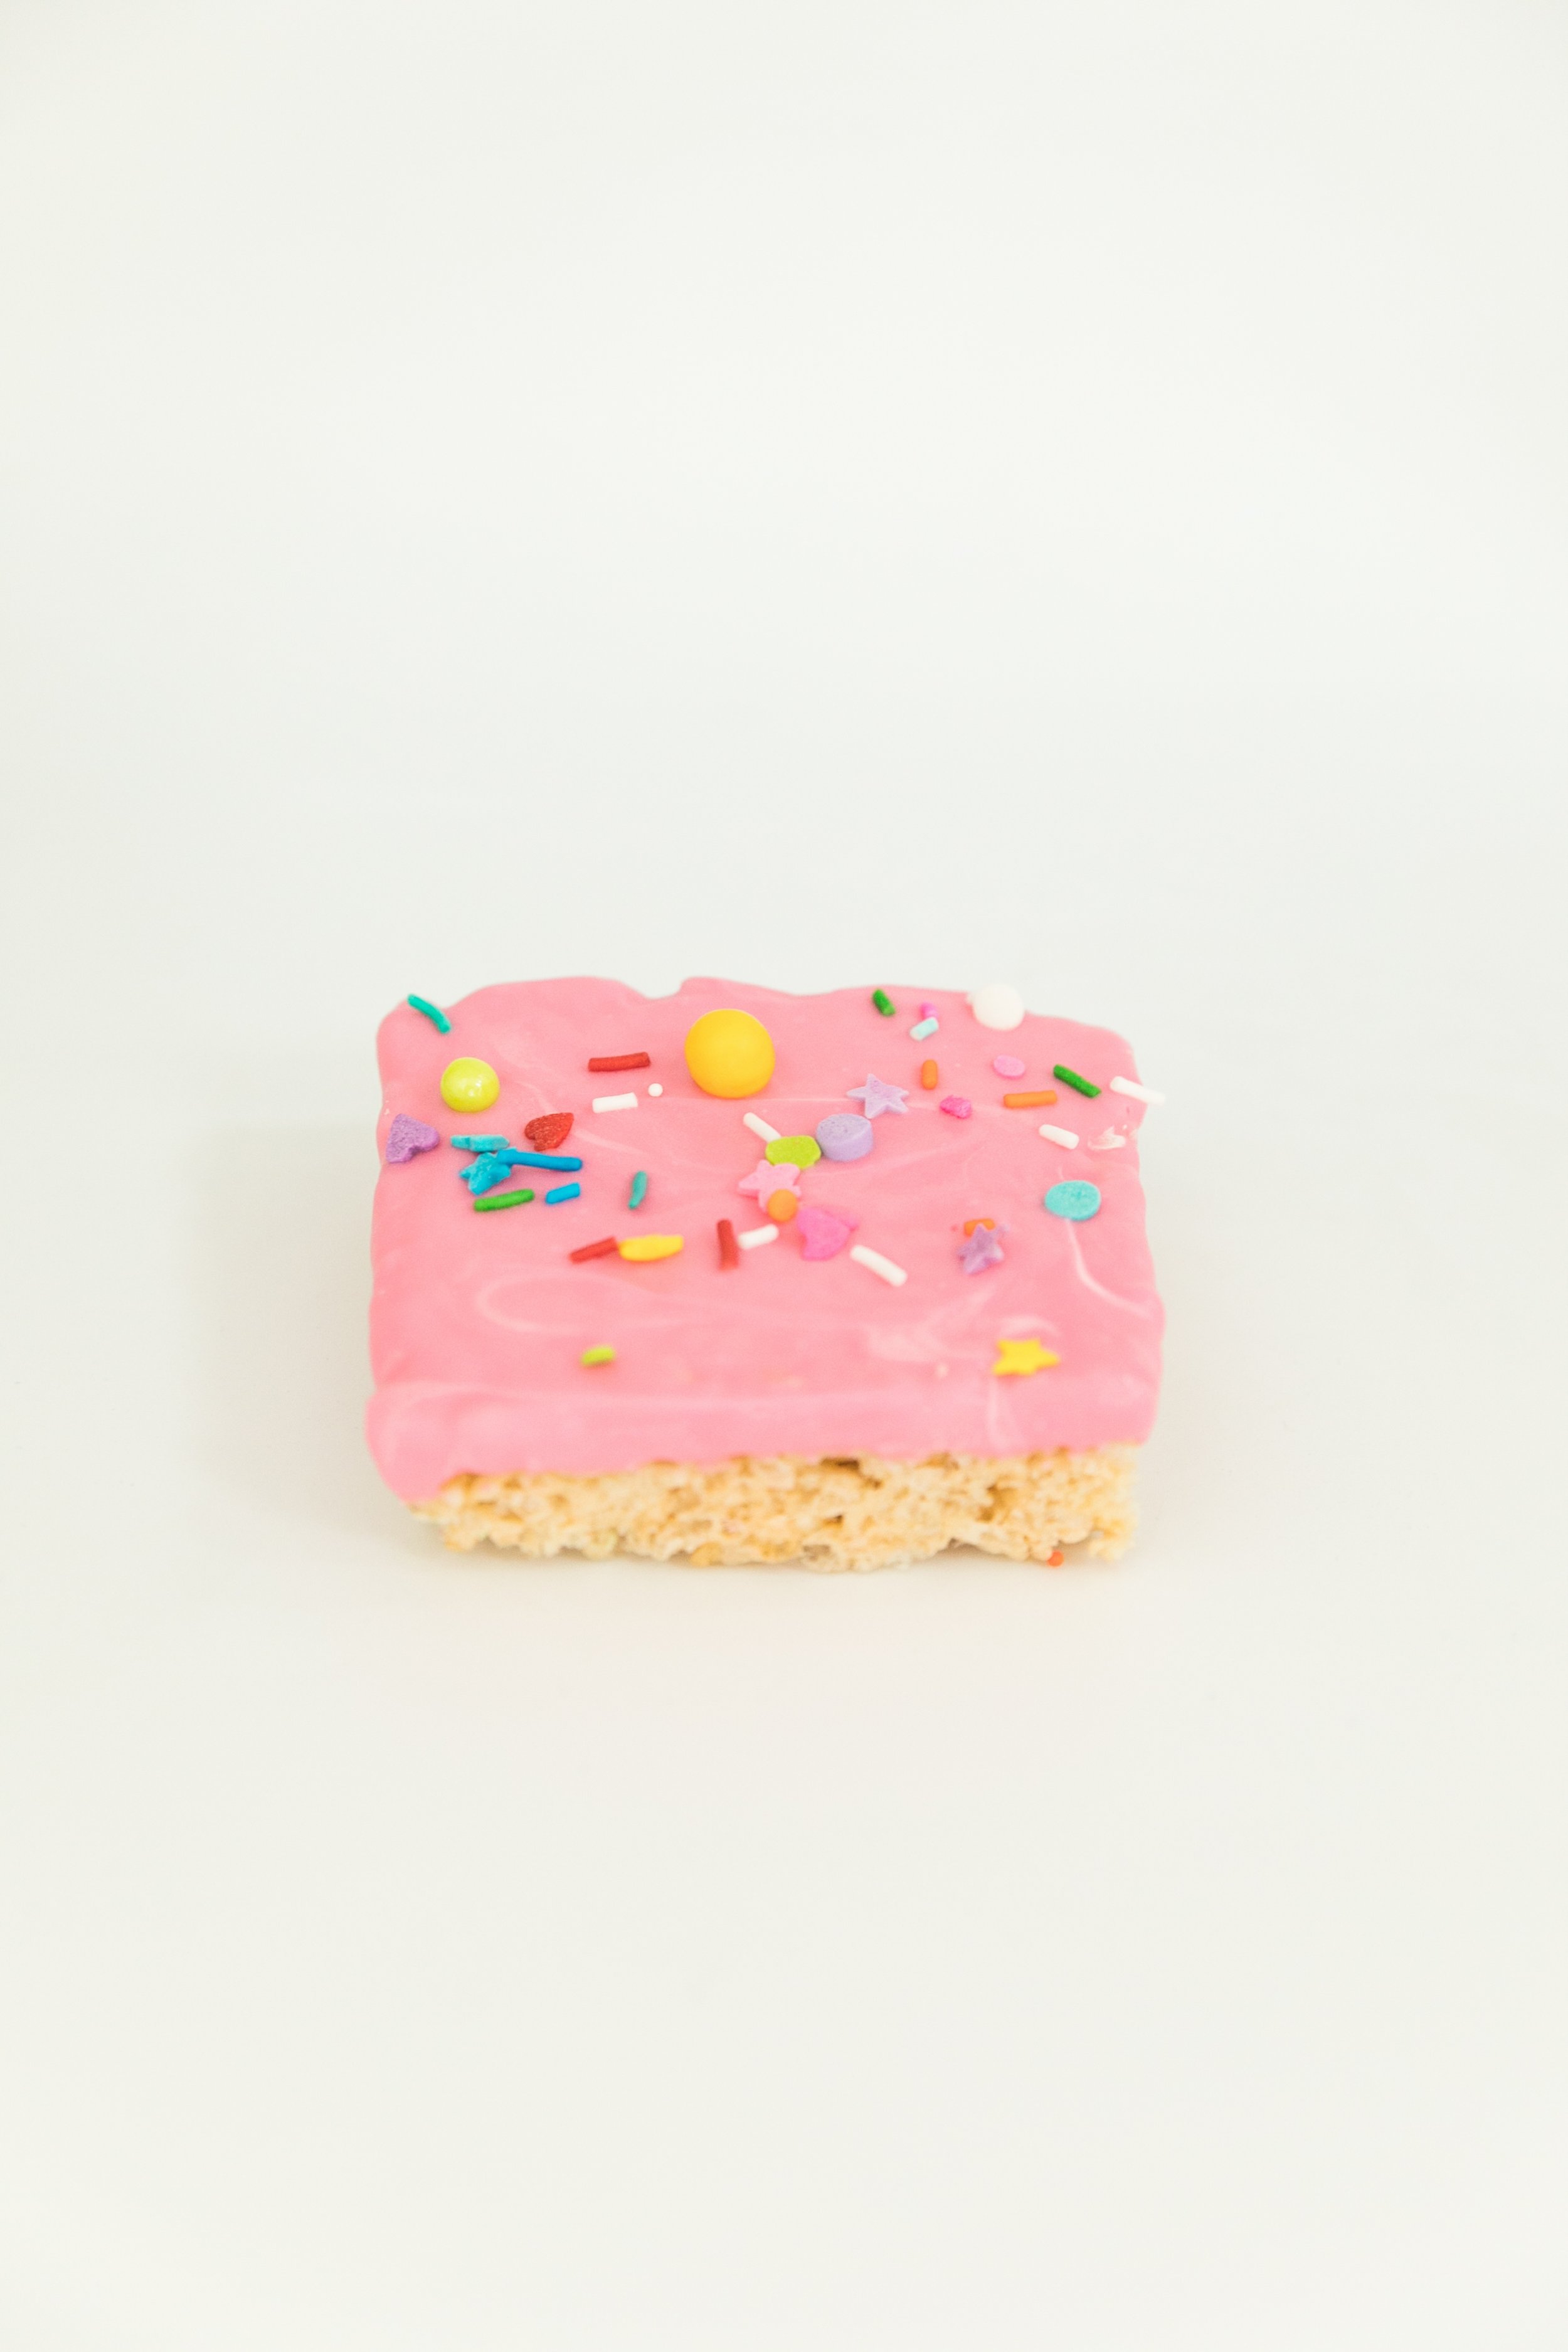  rice krispies treat dipped in pink white chocolate with sweetapolita sprinkles  